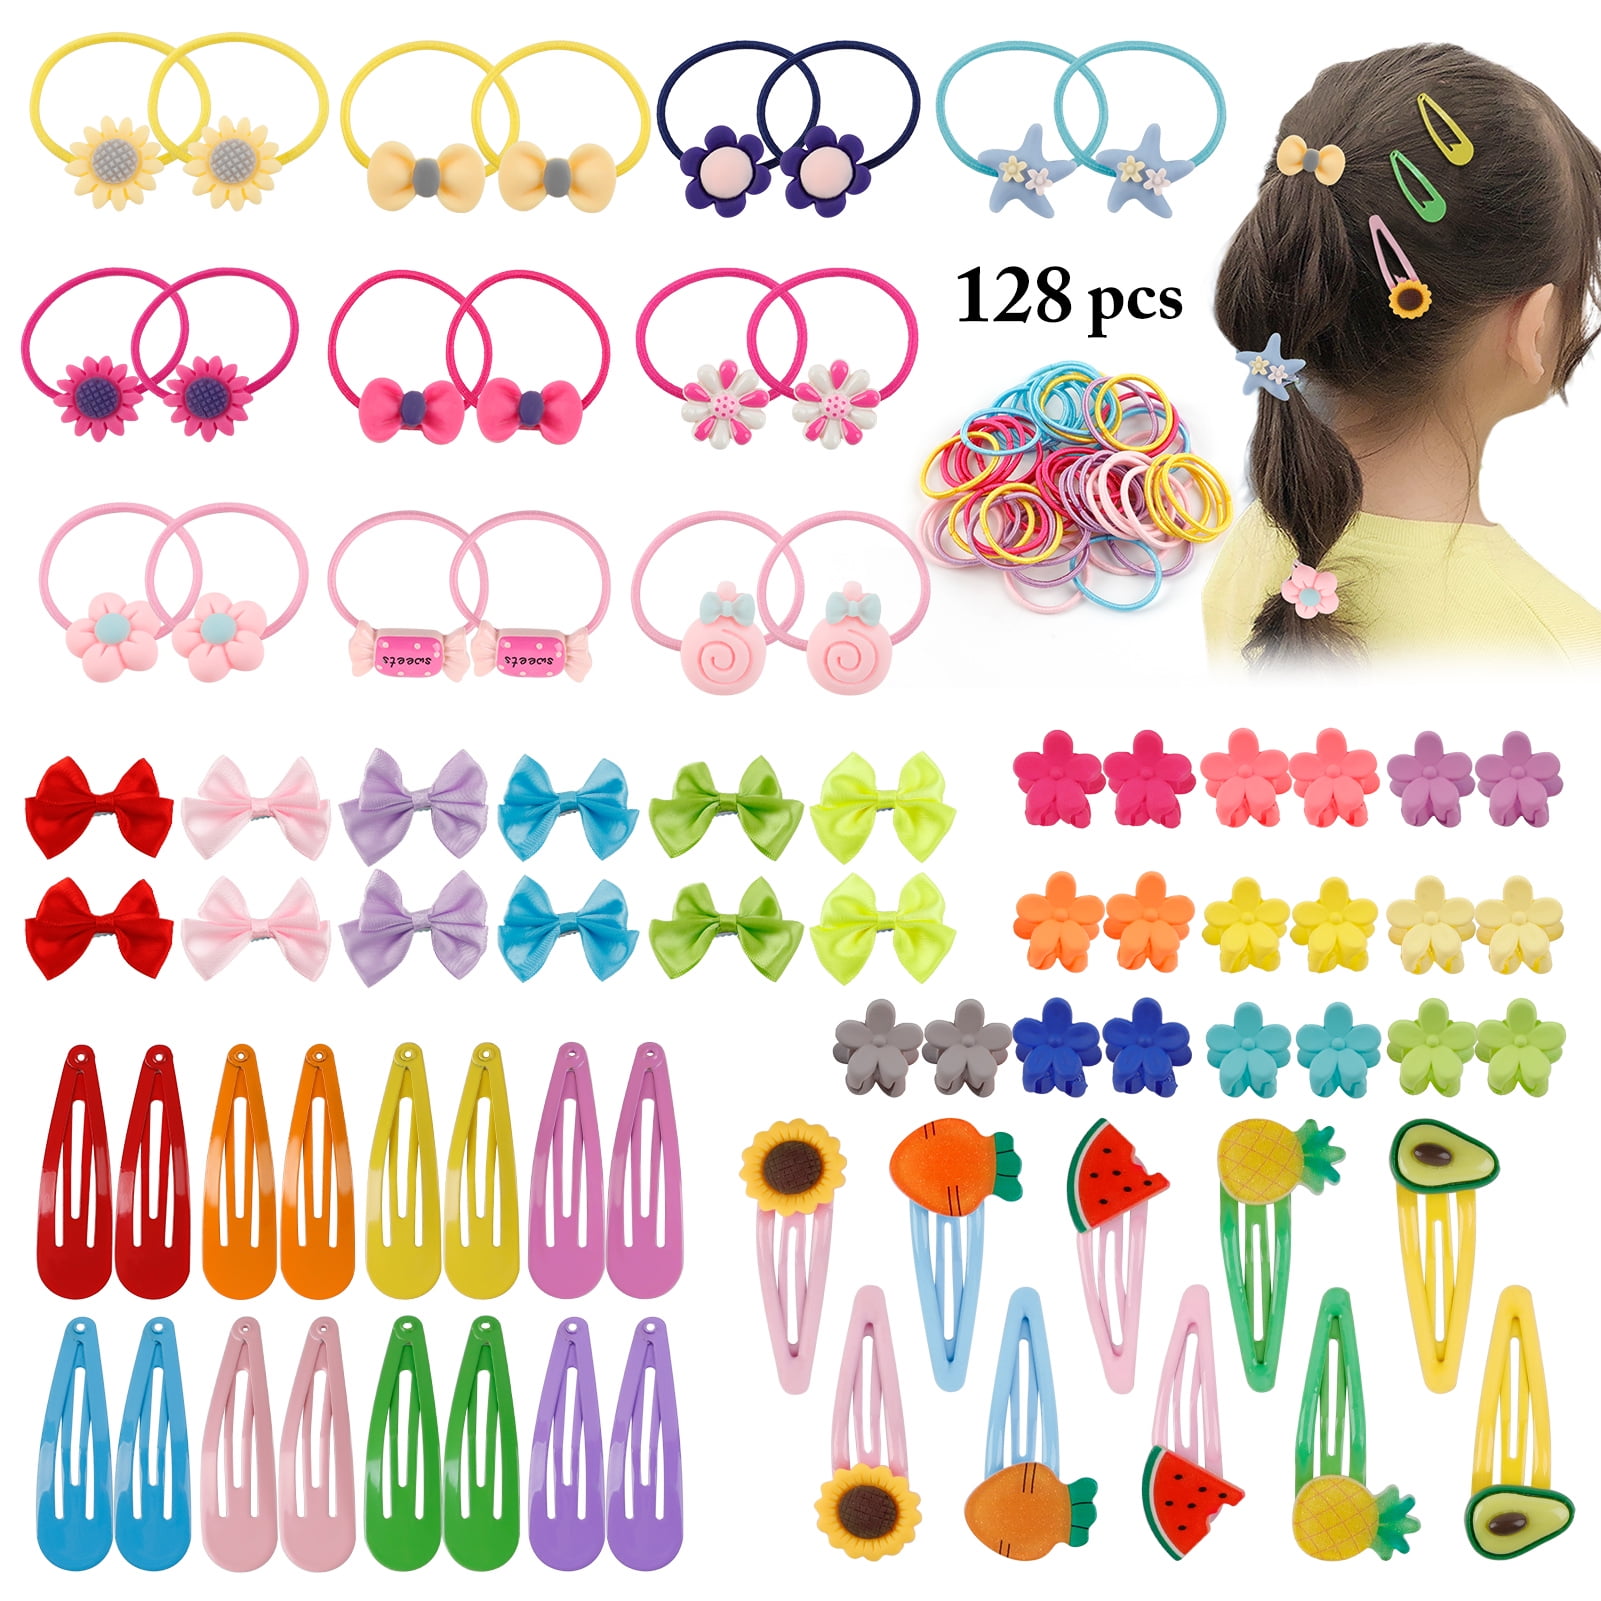 Hair Accessories Collection for Women